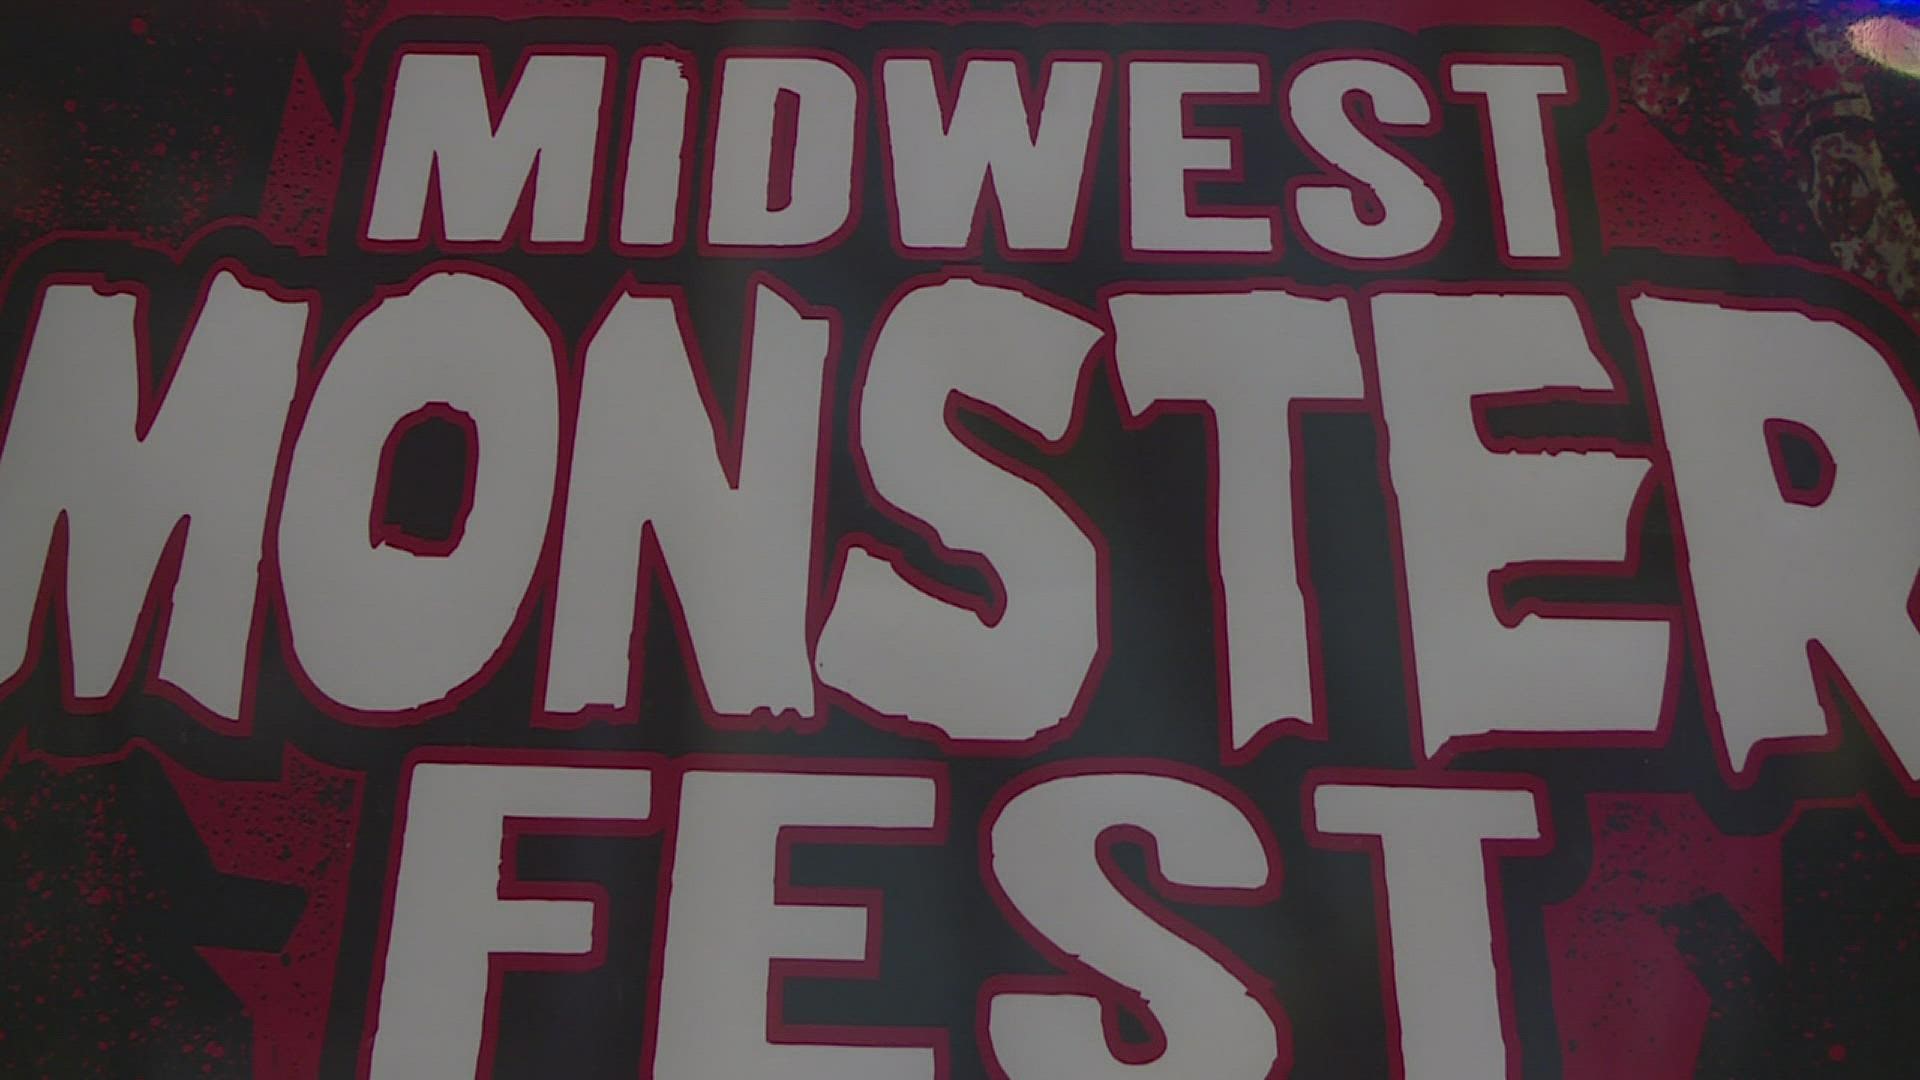 Monster Fest returned to East Moline after the convention was canceled in 2020.